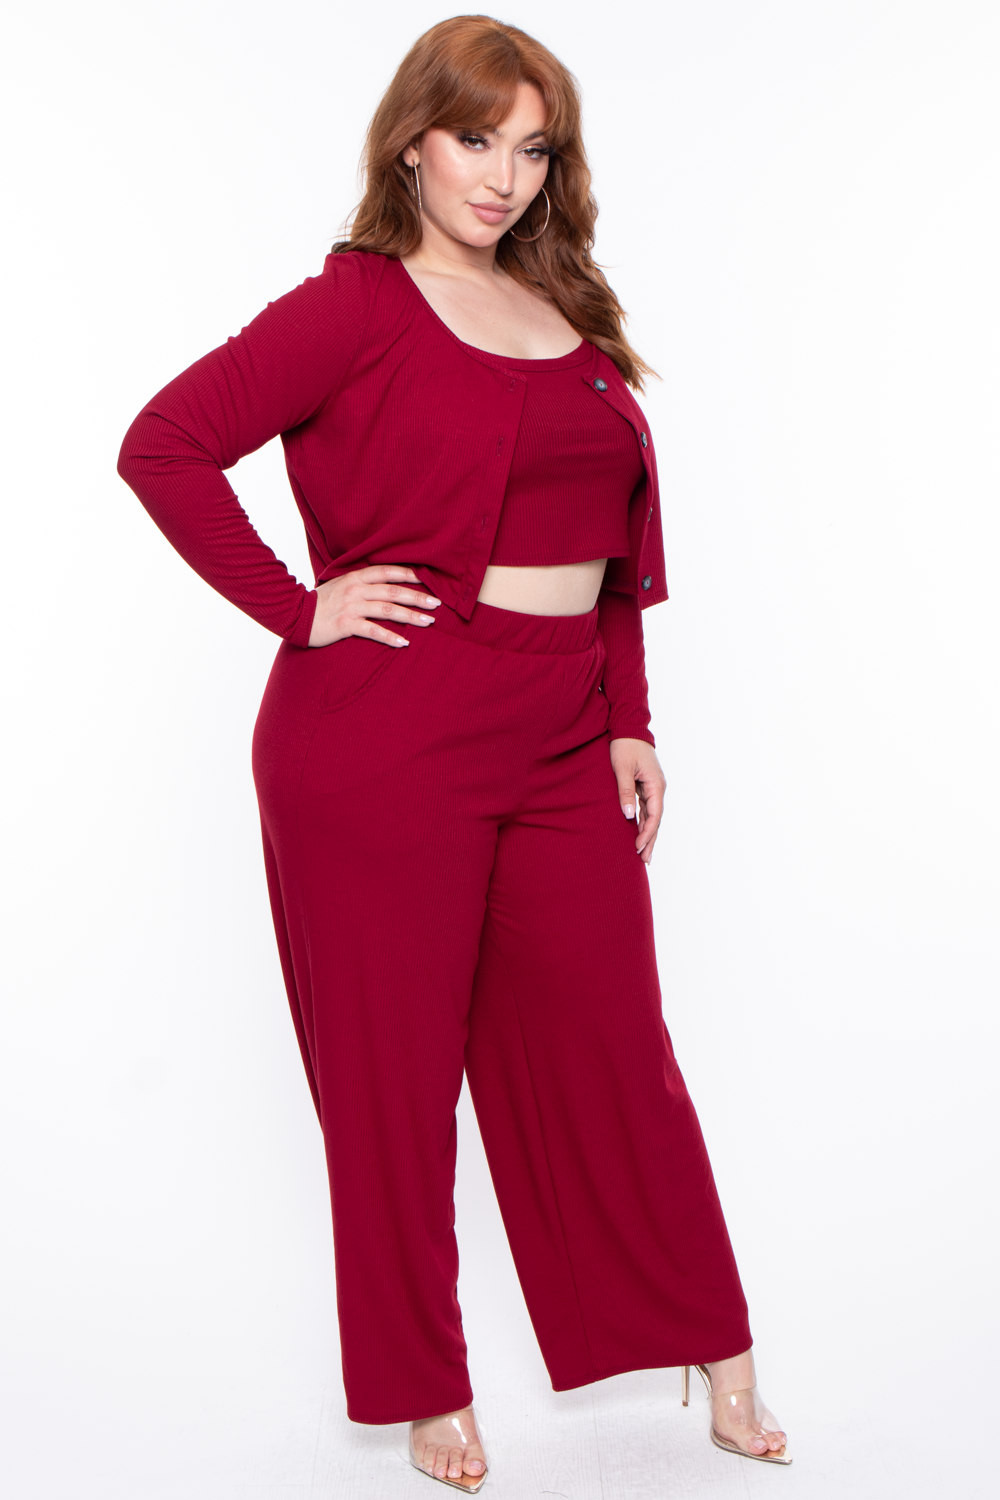 Curvy Sense Tops Plus Size Essential Ribbed Button Front Top - Burgundy